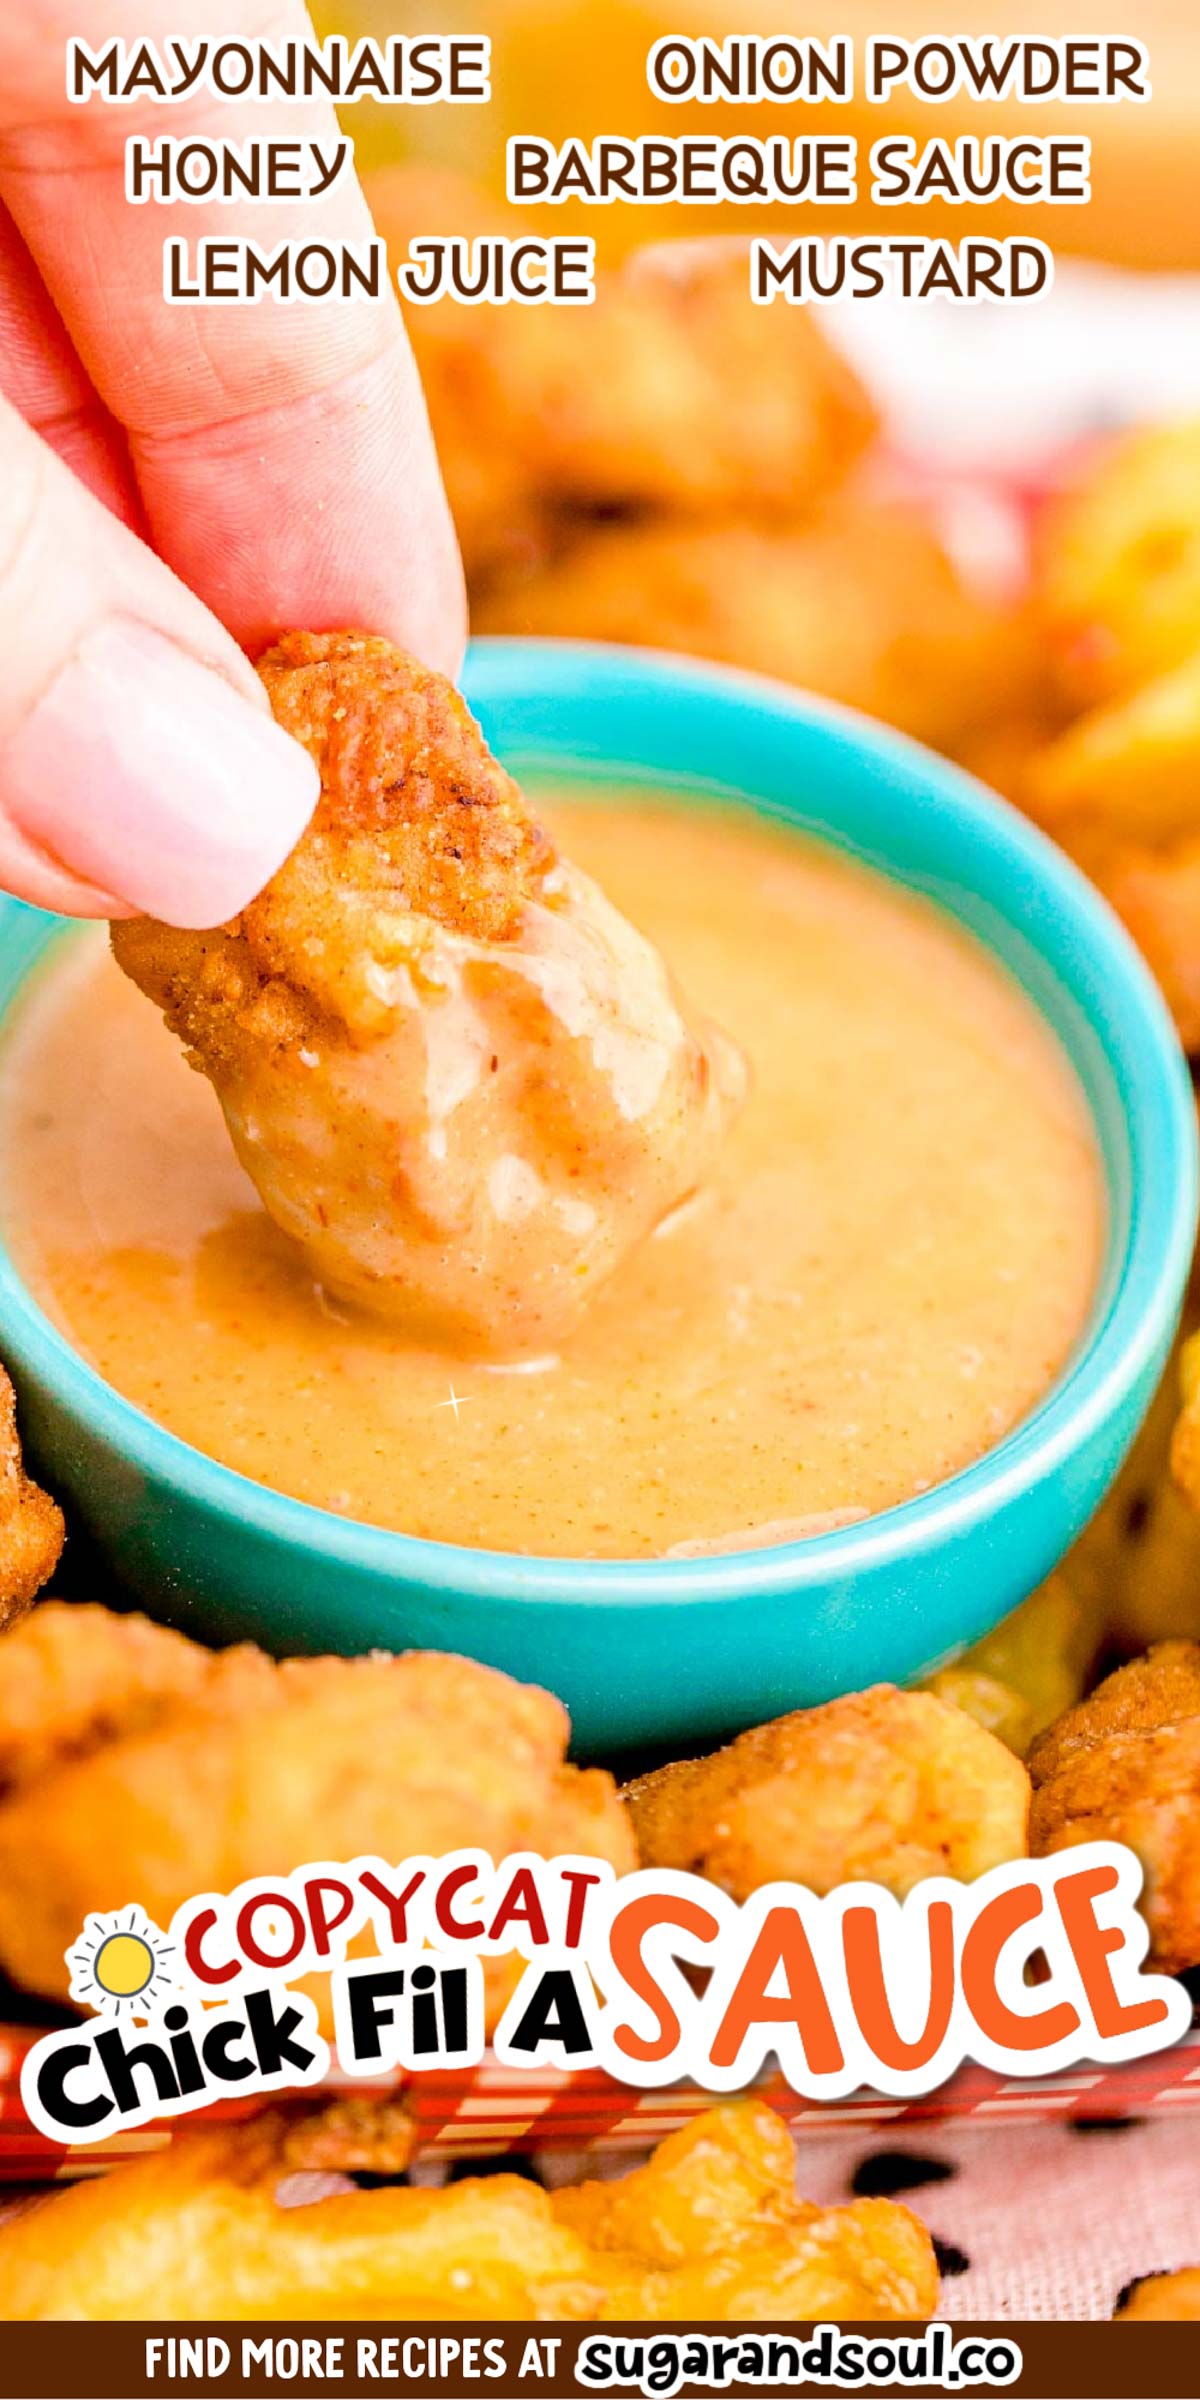 This Homemade Chick-fil-A Sauce is made with honey, mayonnaise, BBQ sauce, and three more easy ingredients in just 5 minutes or less! A tasty dipping sauce for chicken nuggets and French fries! via @sugarandsoulco